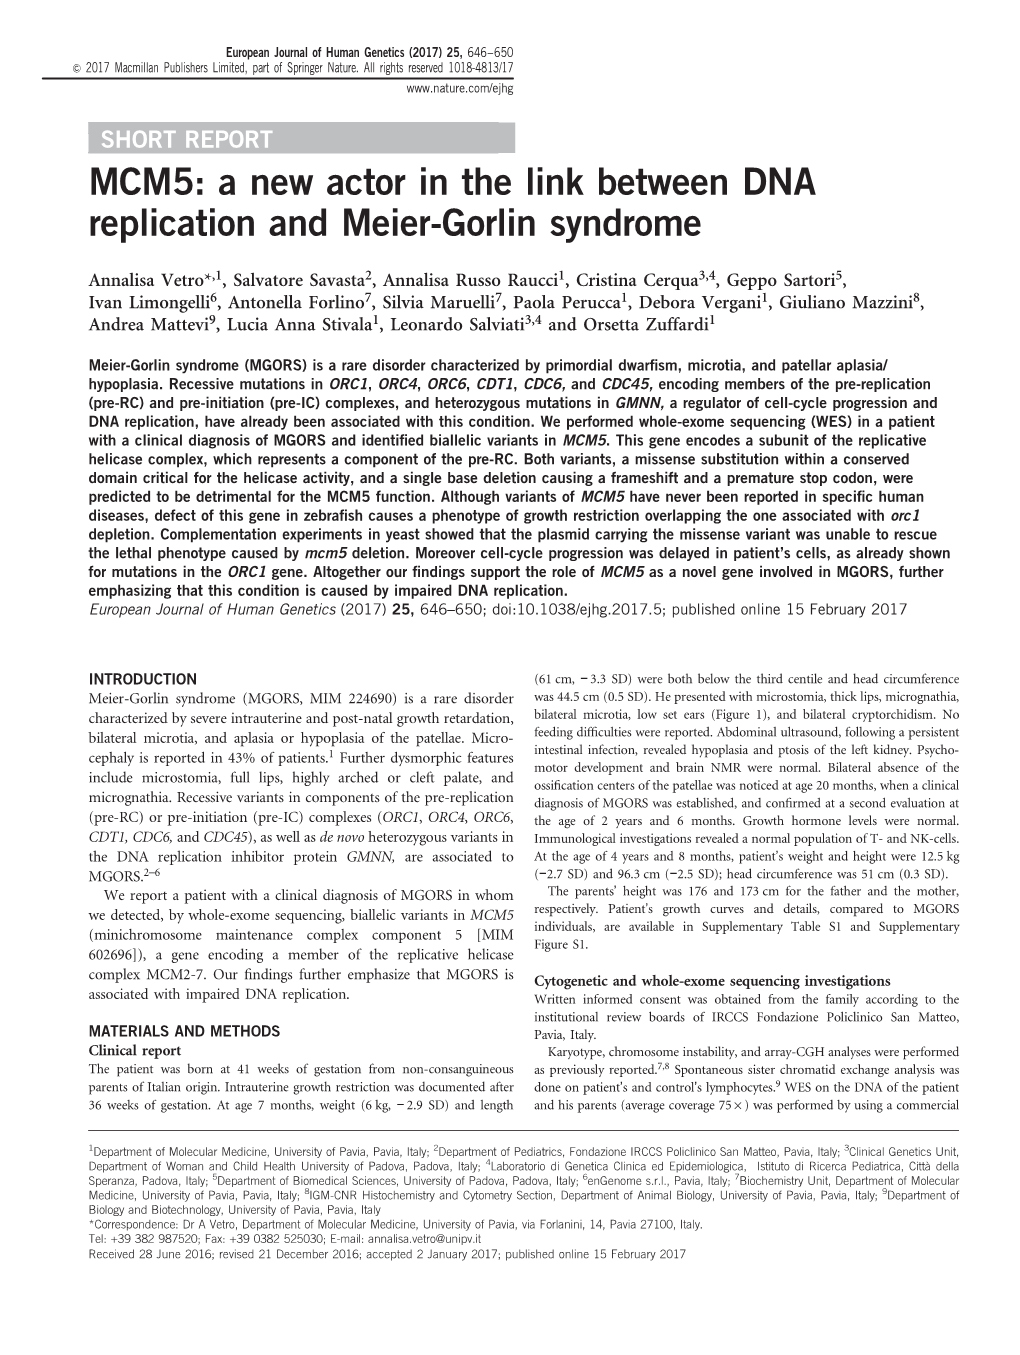 MCM5: a New Actor in the Link Between DNA Replication and Meier-Gorlin Syndrome